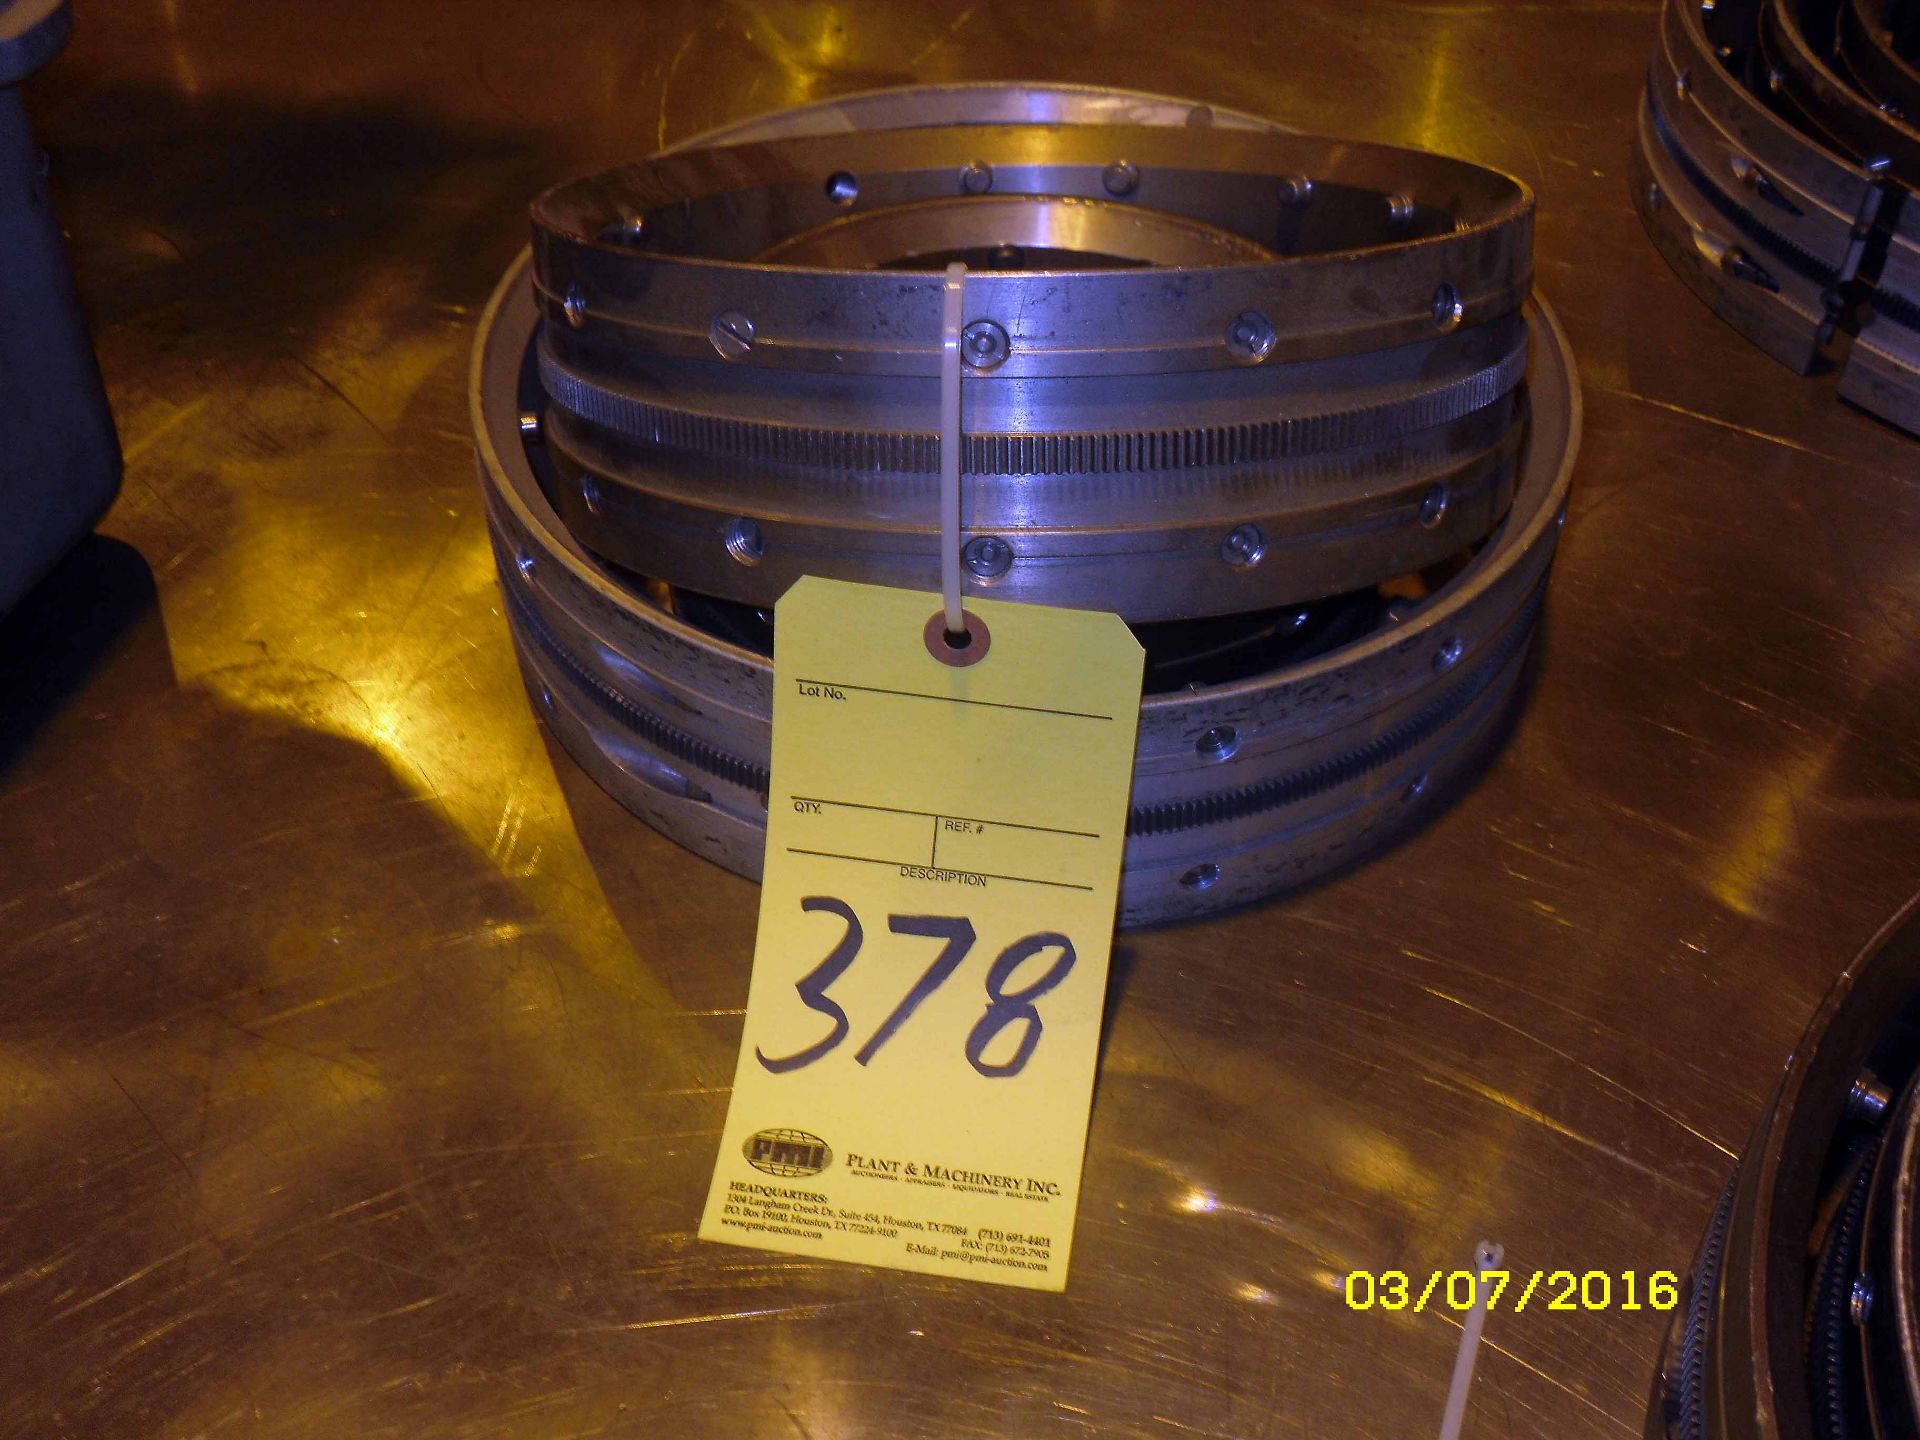 LOT OF TRACK, for Arc Machines Mdl. 15, 10", 8" & 6" rings